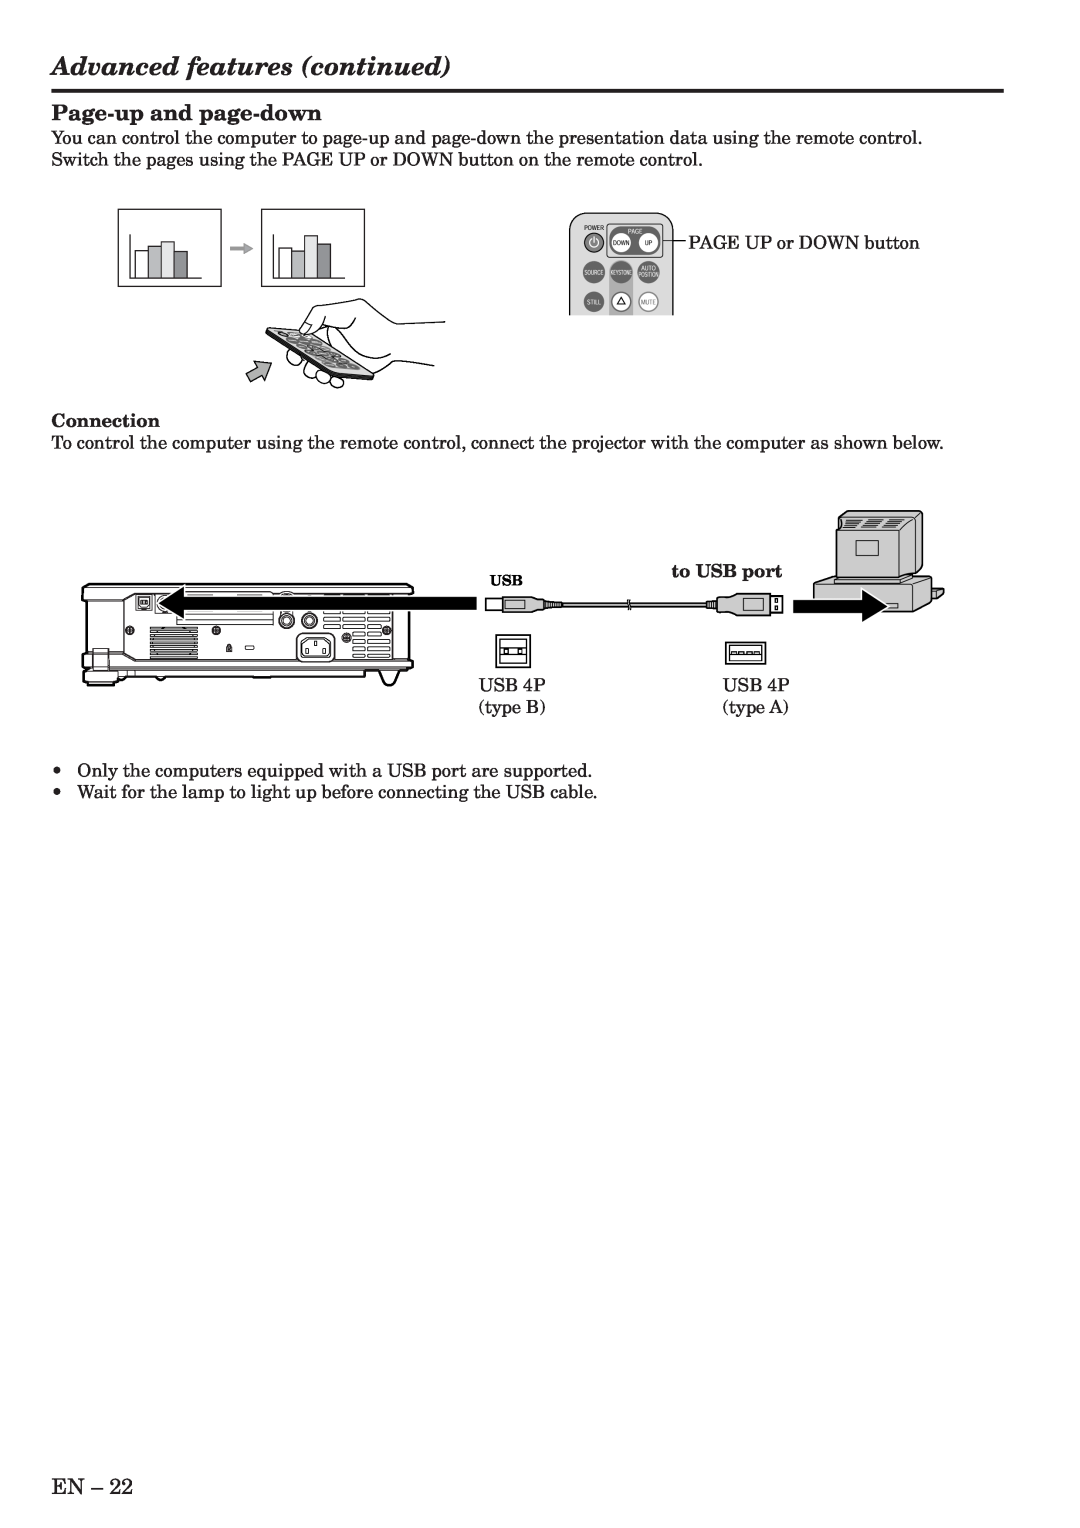 Mitsubishi Electronics XL8U, SL4U user manual Advanced features continued, Page-up and page-down, Connection, to USB port 